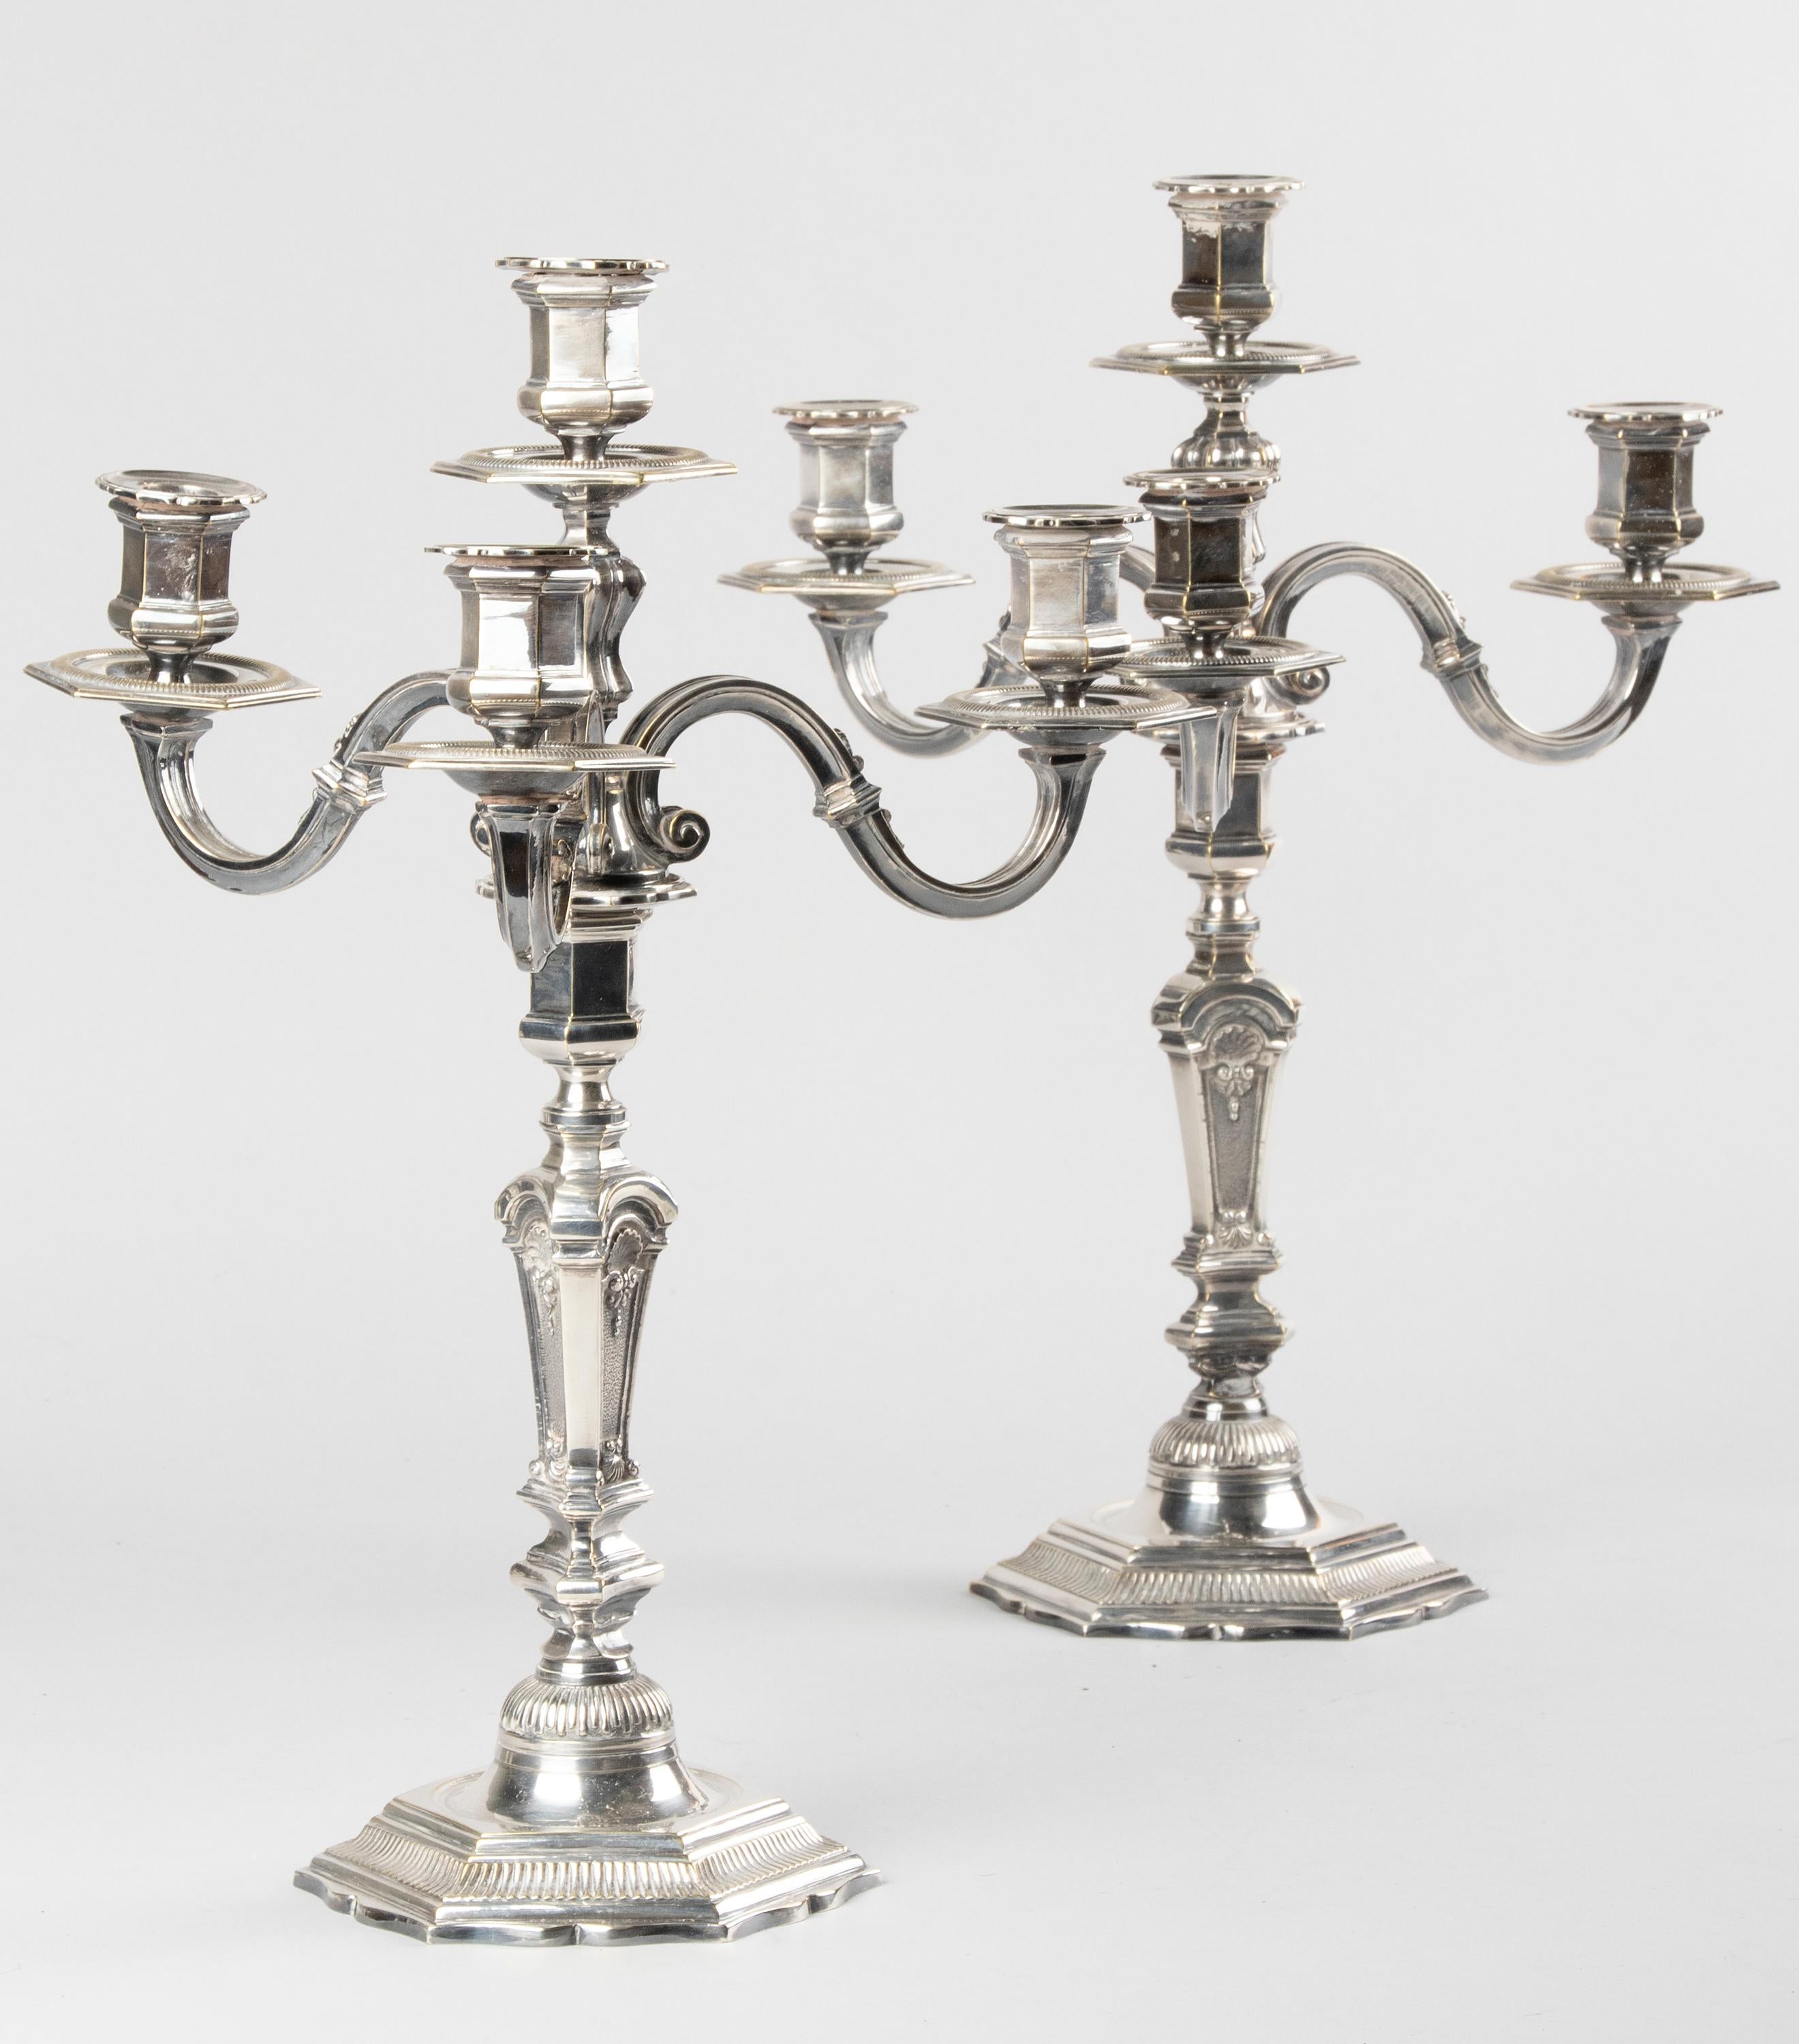 A pair of beautiful antique French Regency-style silver plated candlesticks. The candlesticks have beautiful decorations and ornaments. They are heavy and sturdy. There is room for 4 candles per candlestick. The top part is removable, so they can